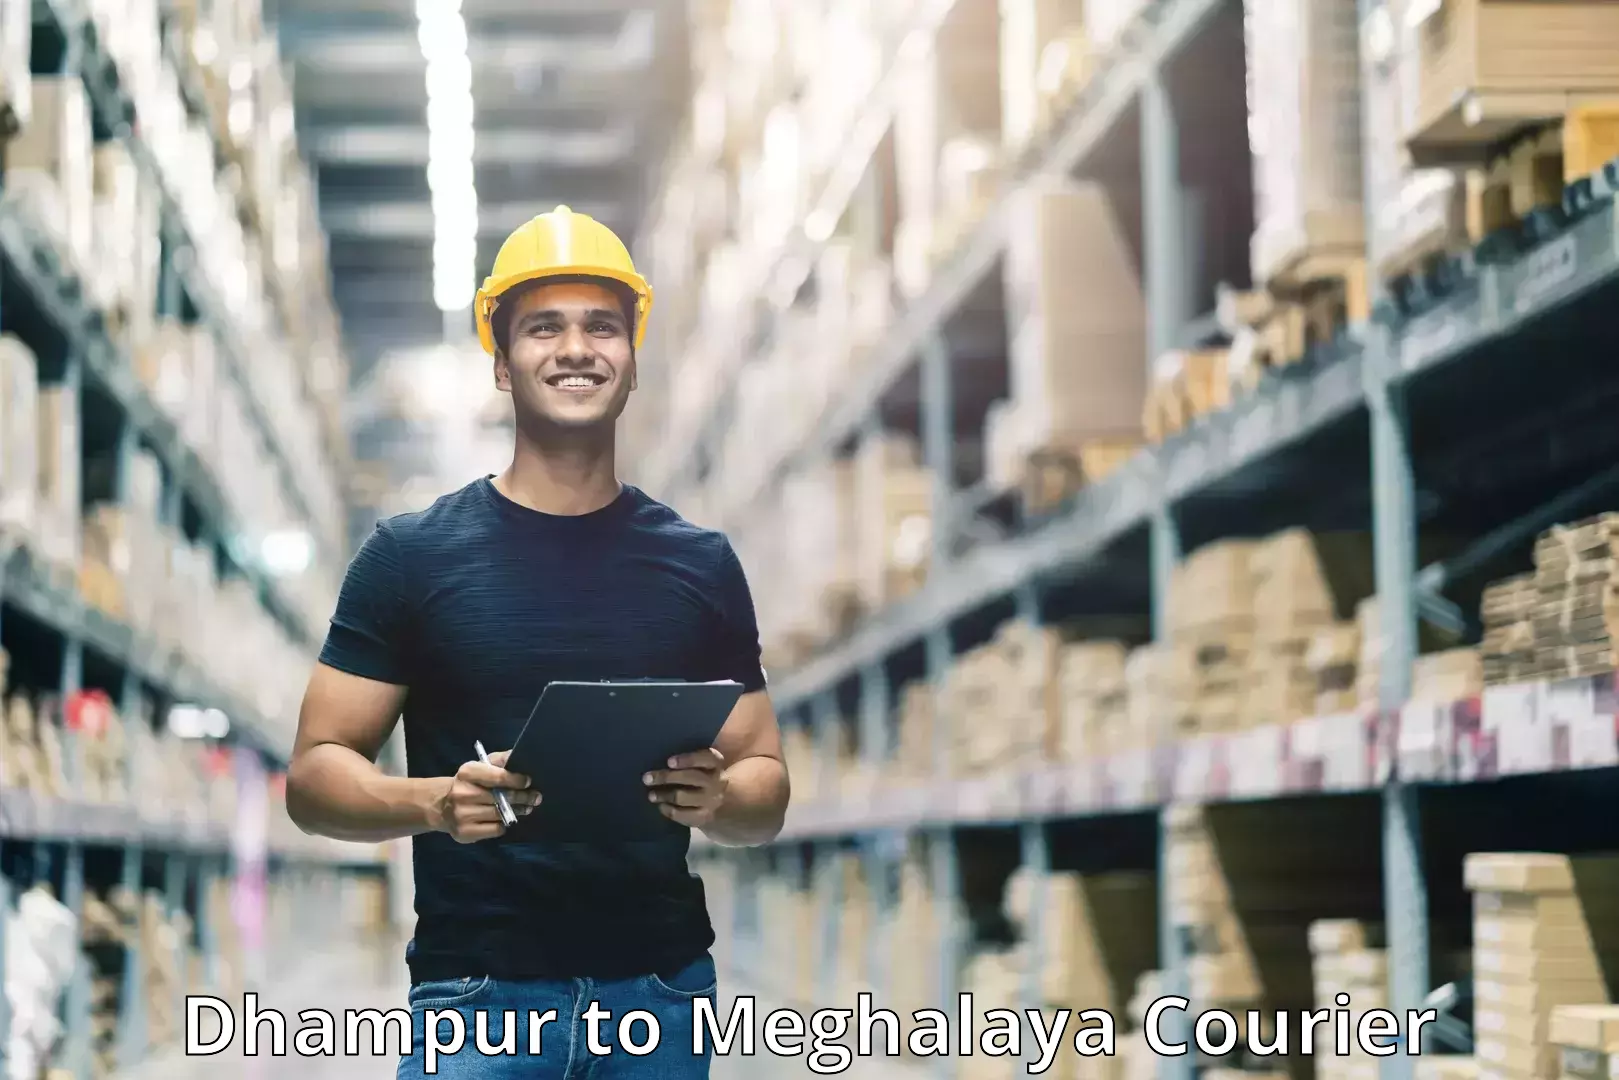 Affordable parcel service Dhampur to Meghalaya